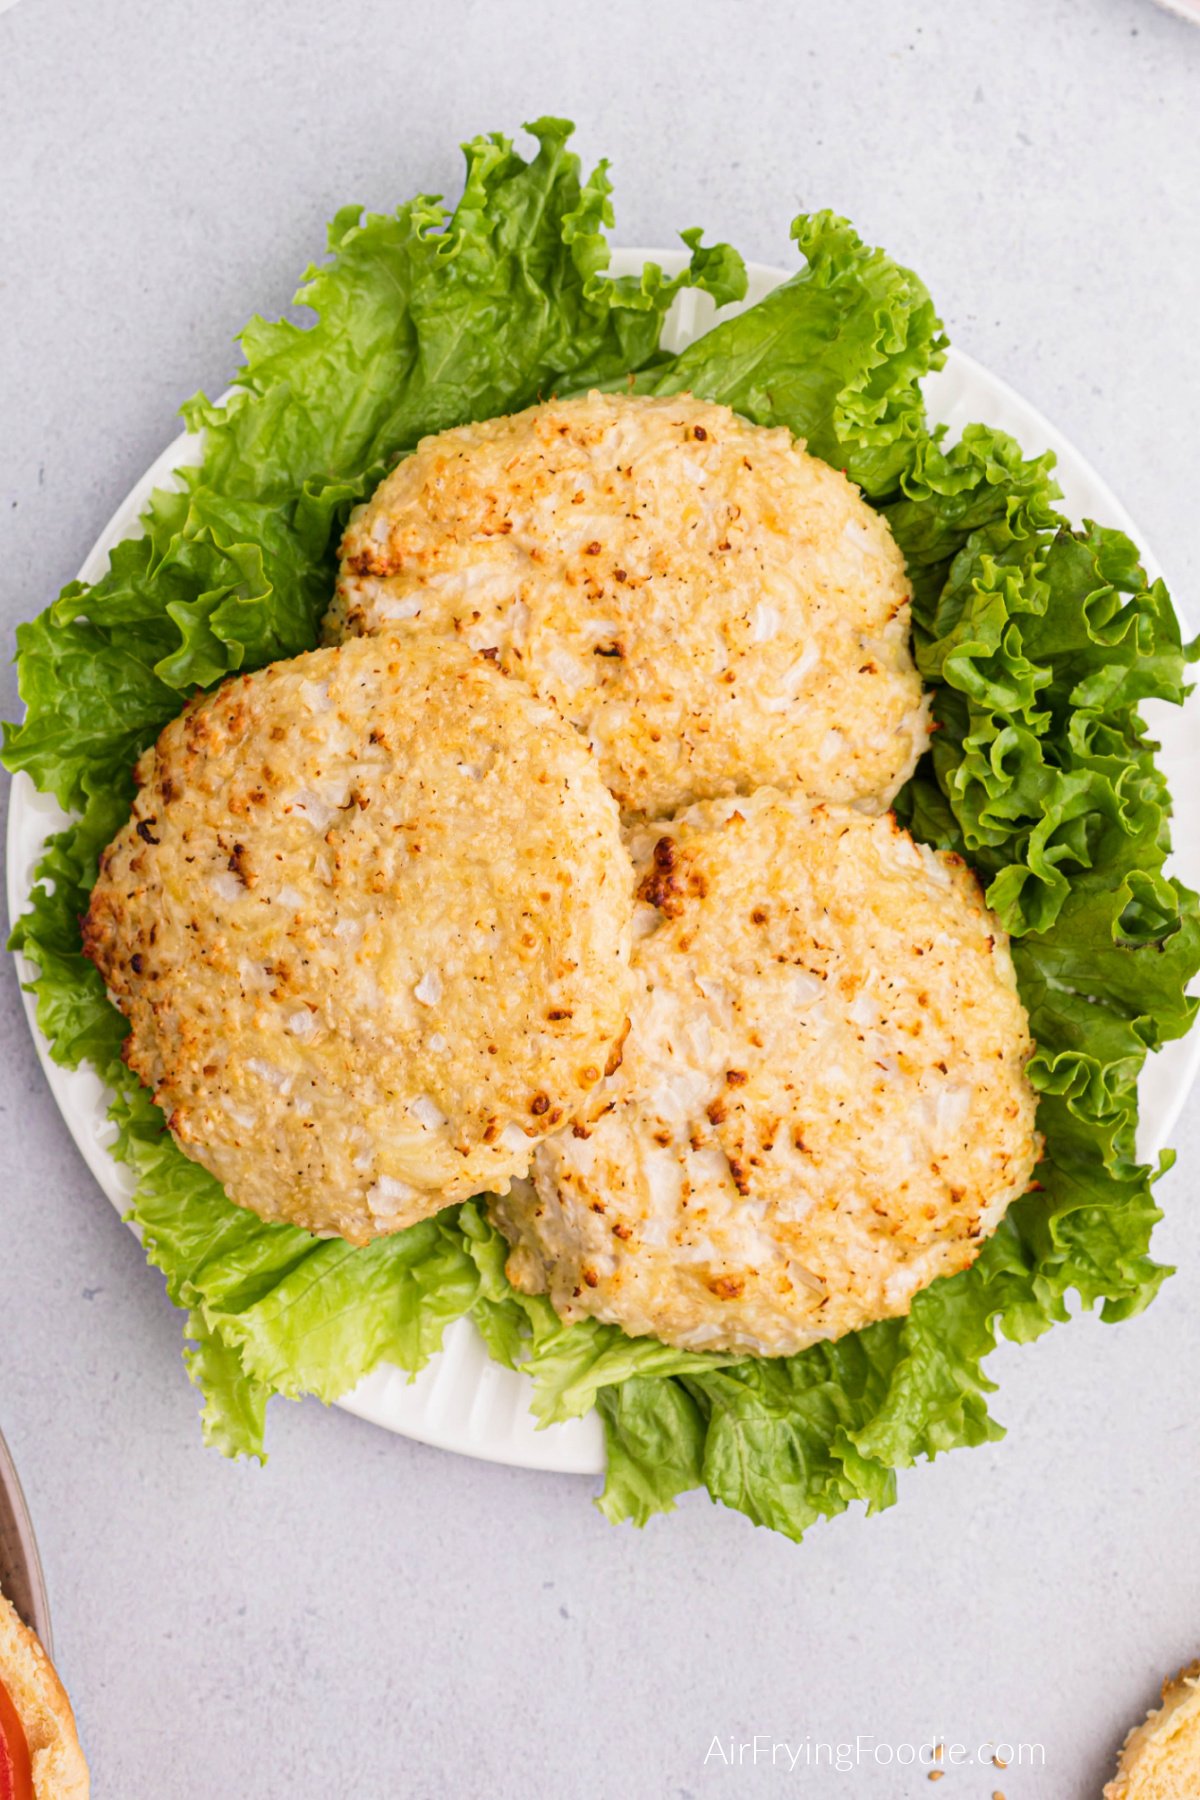 Chicken burgers stacked on a plate with lettuce, ready to be served.